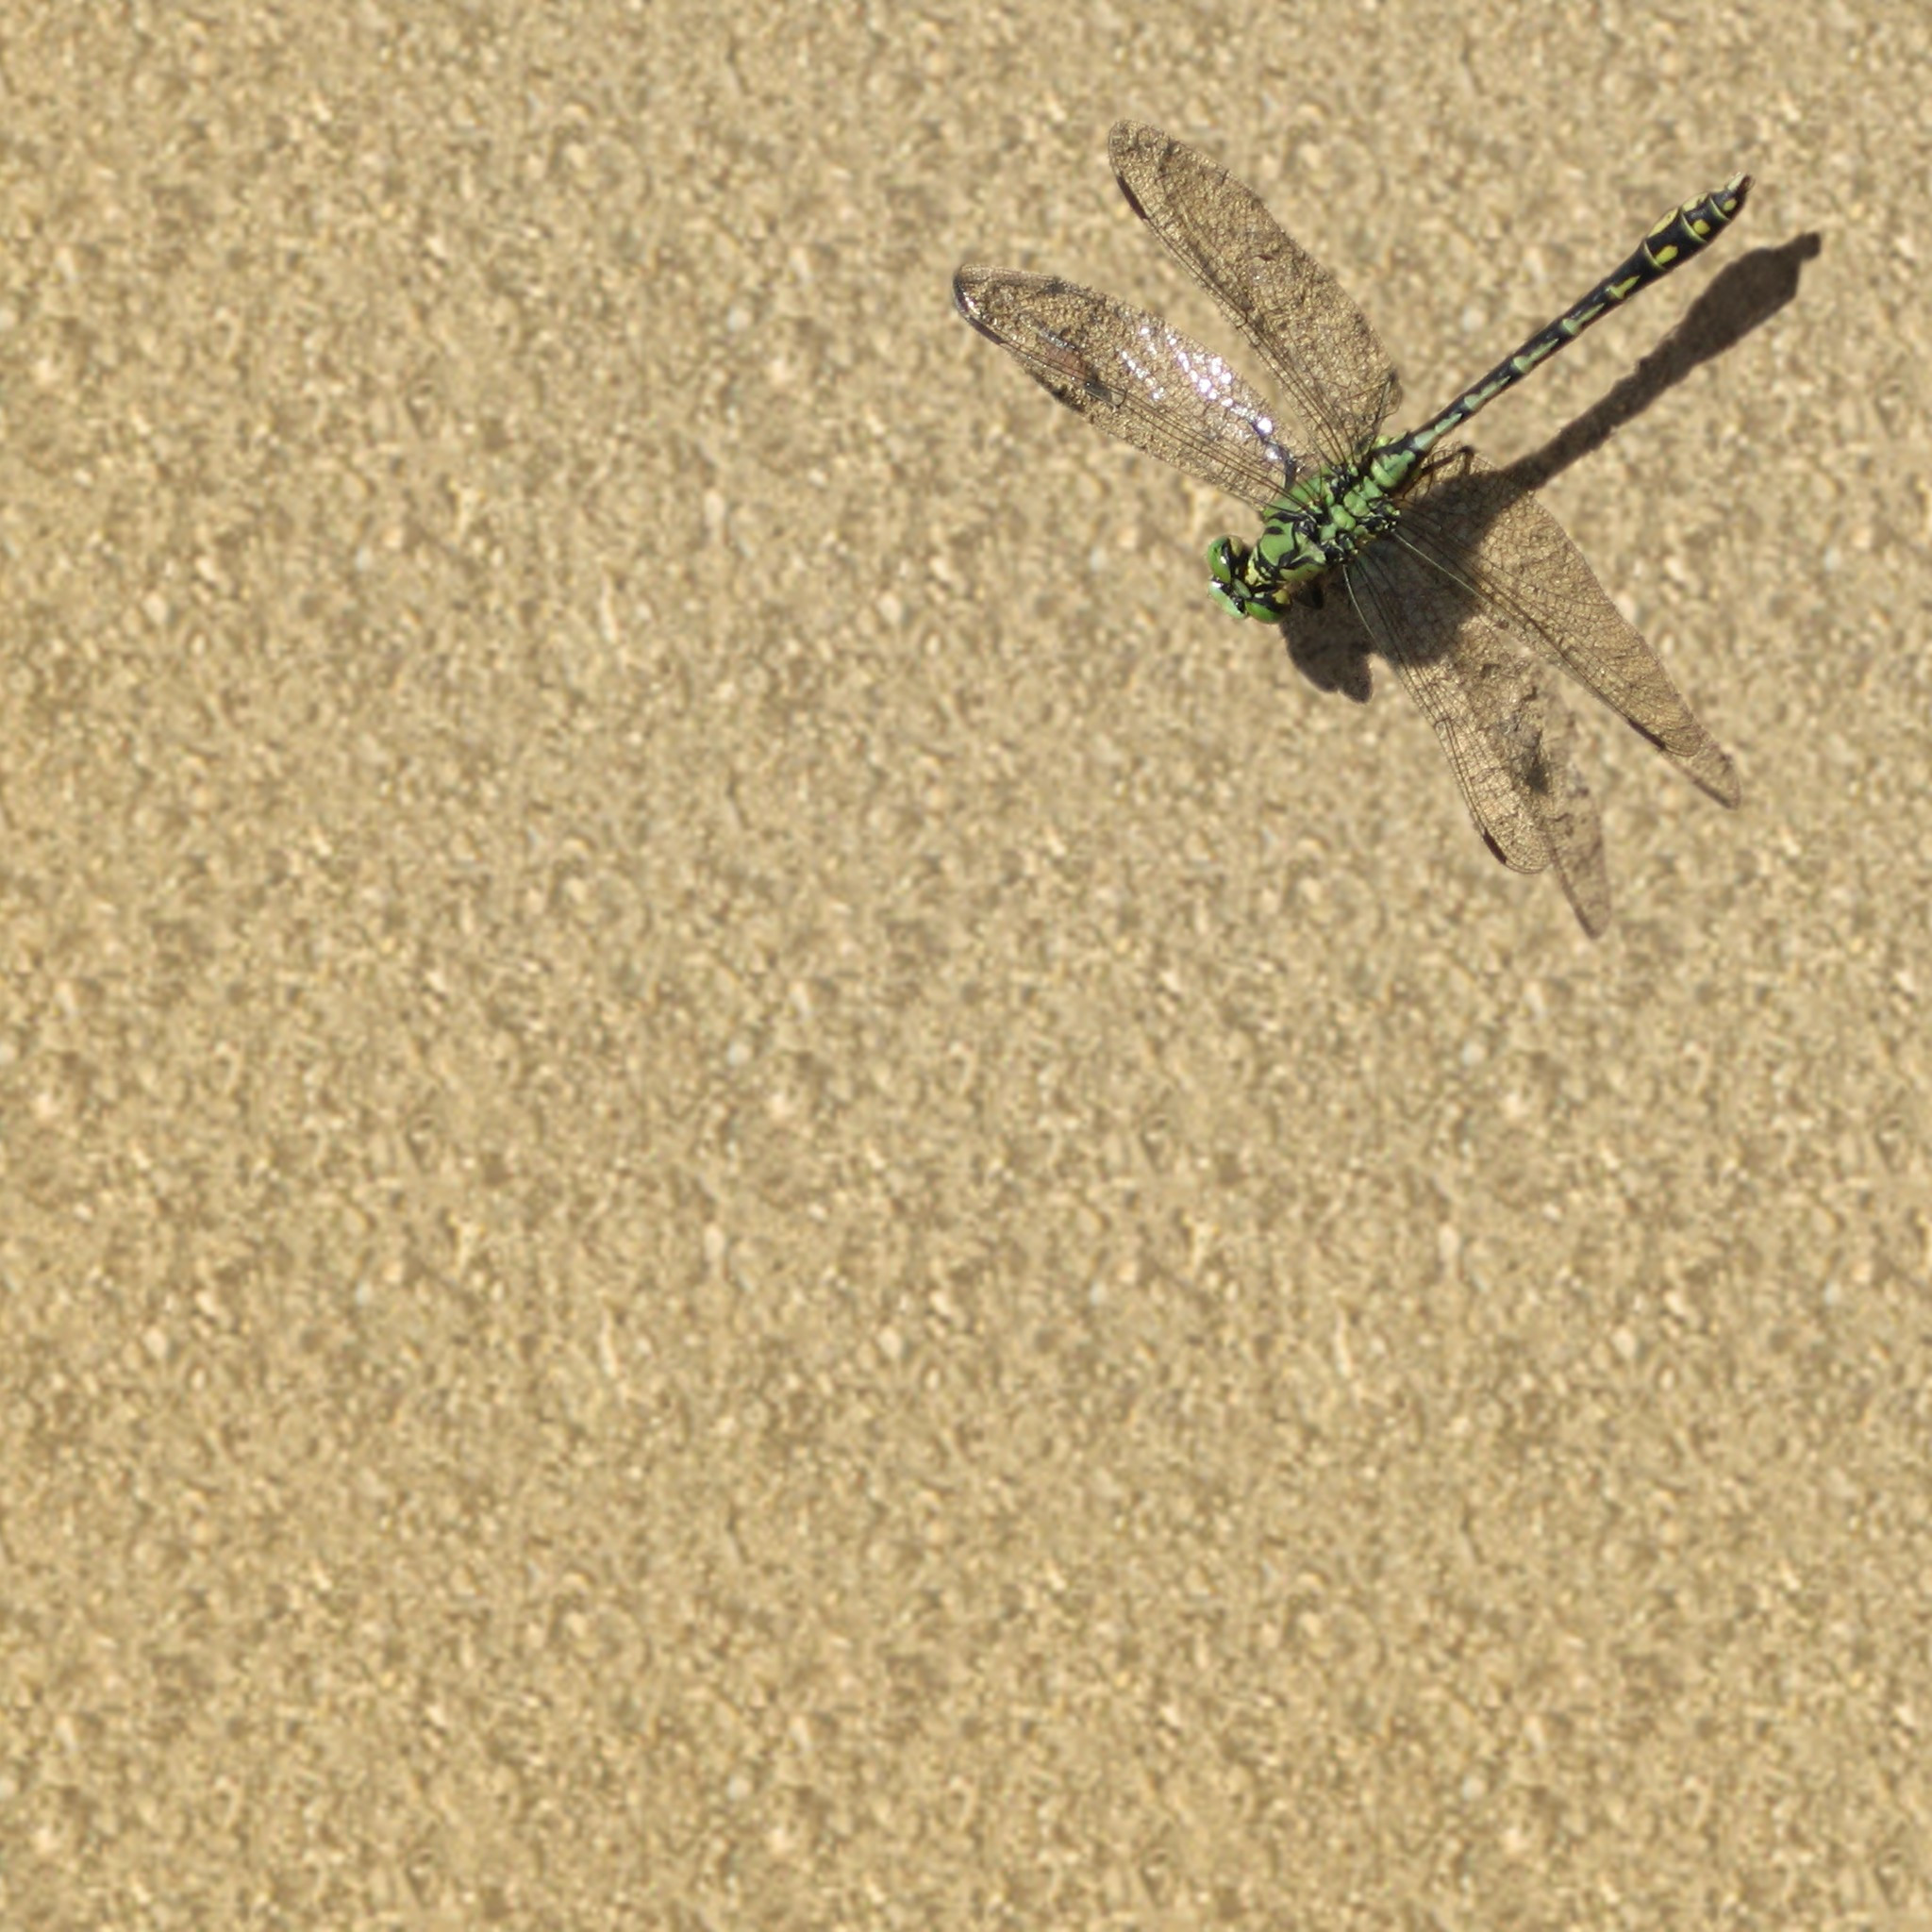 2048x2048 789 0: Dragonfly Insects Nature iPad wallpaper